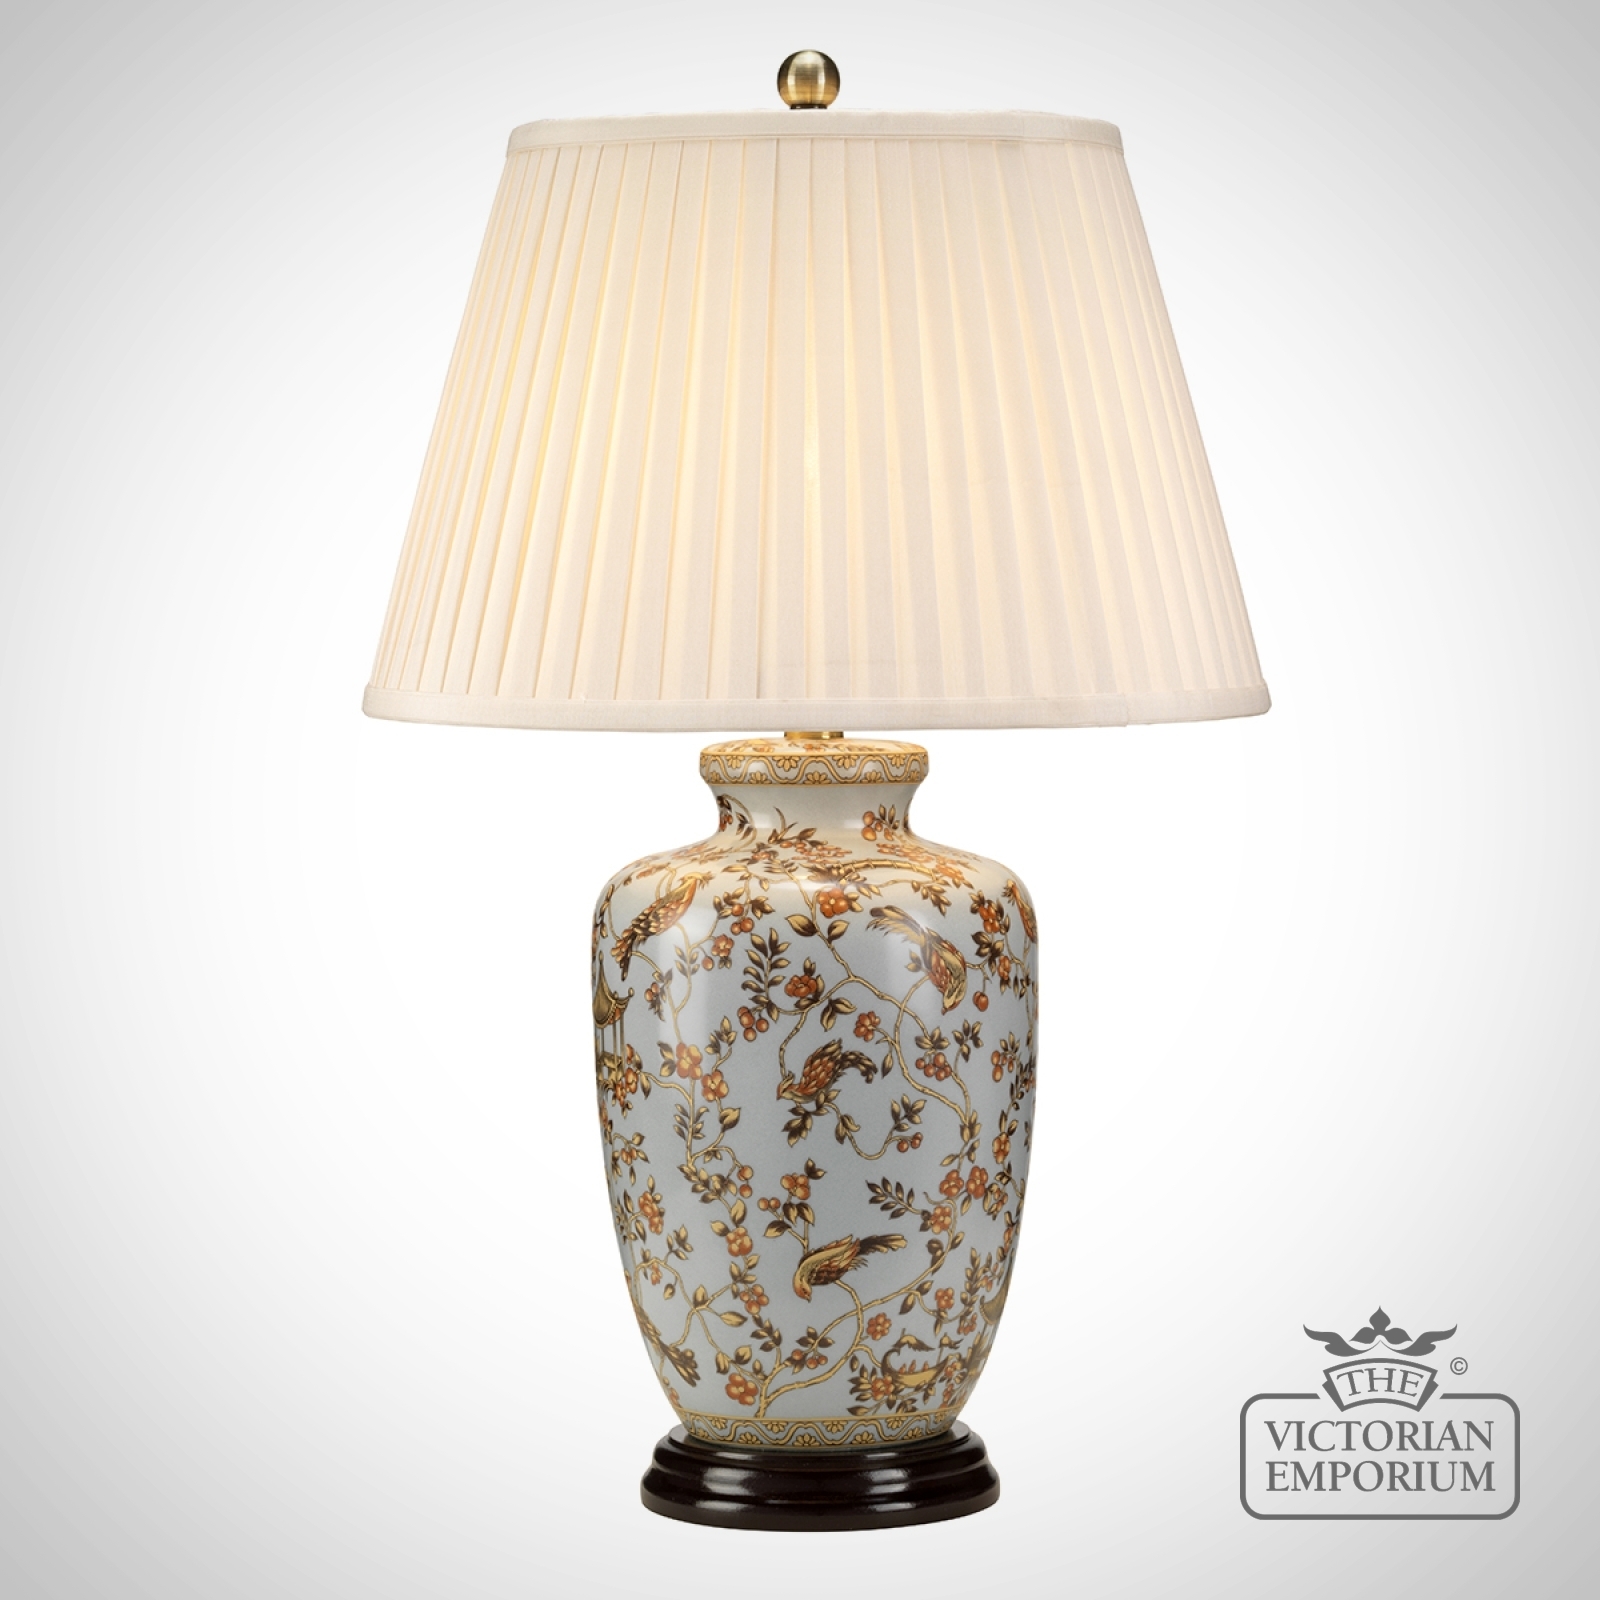 Gold Birds Table Lamp with Porcelain Base and Fabric Shade